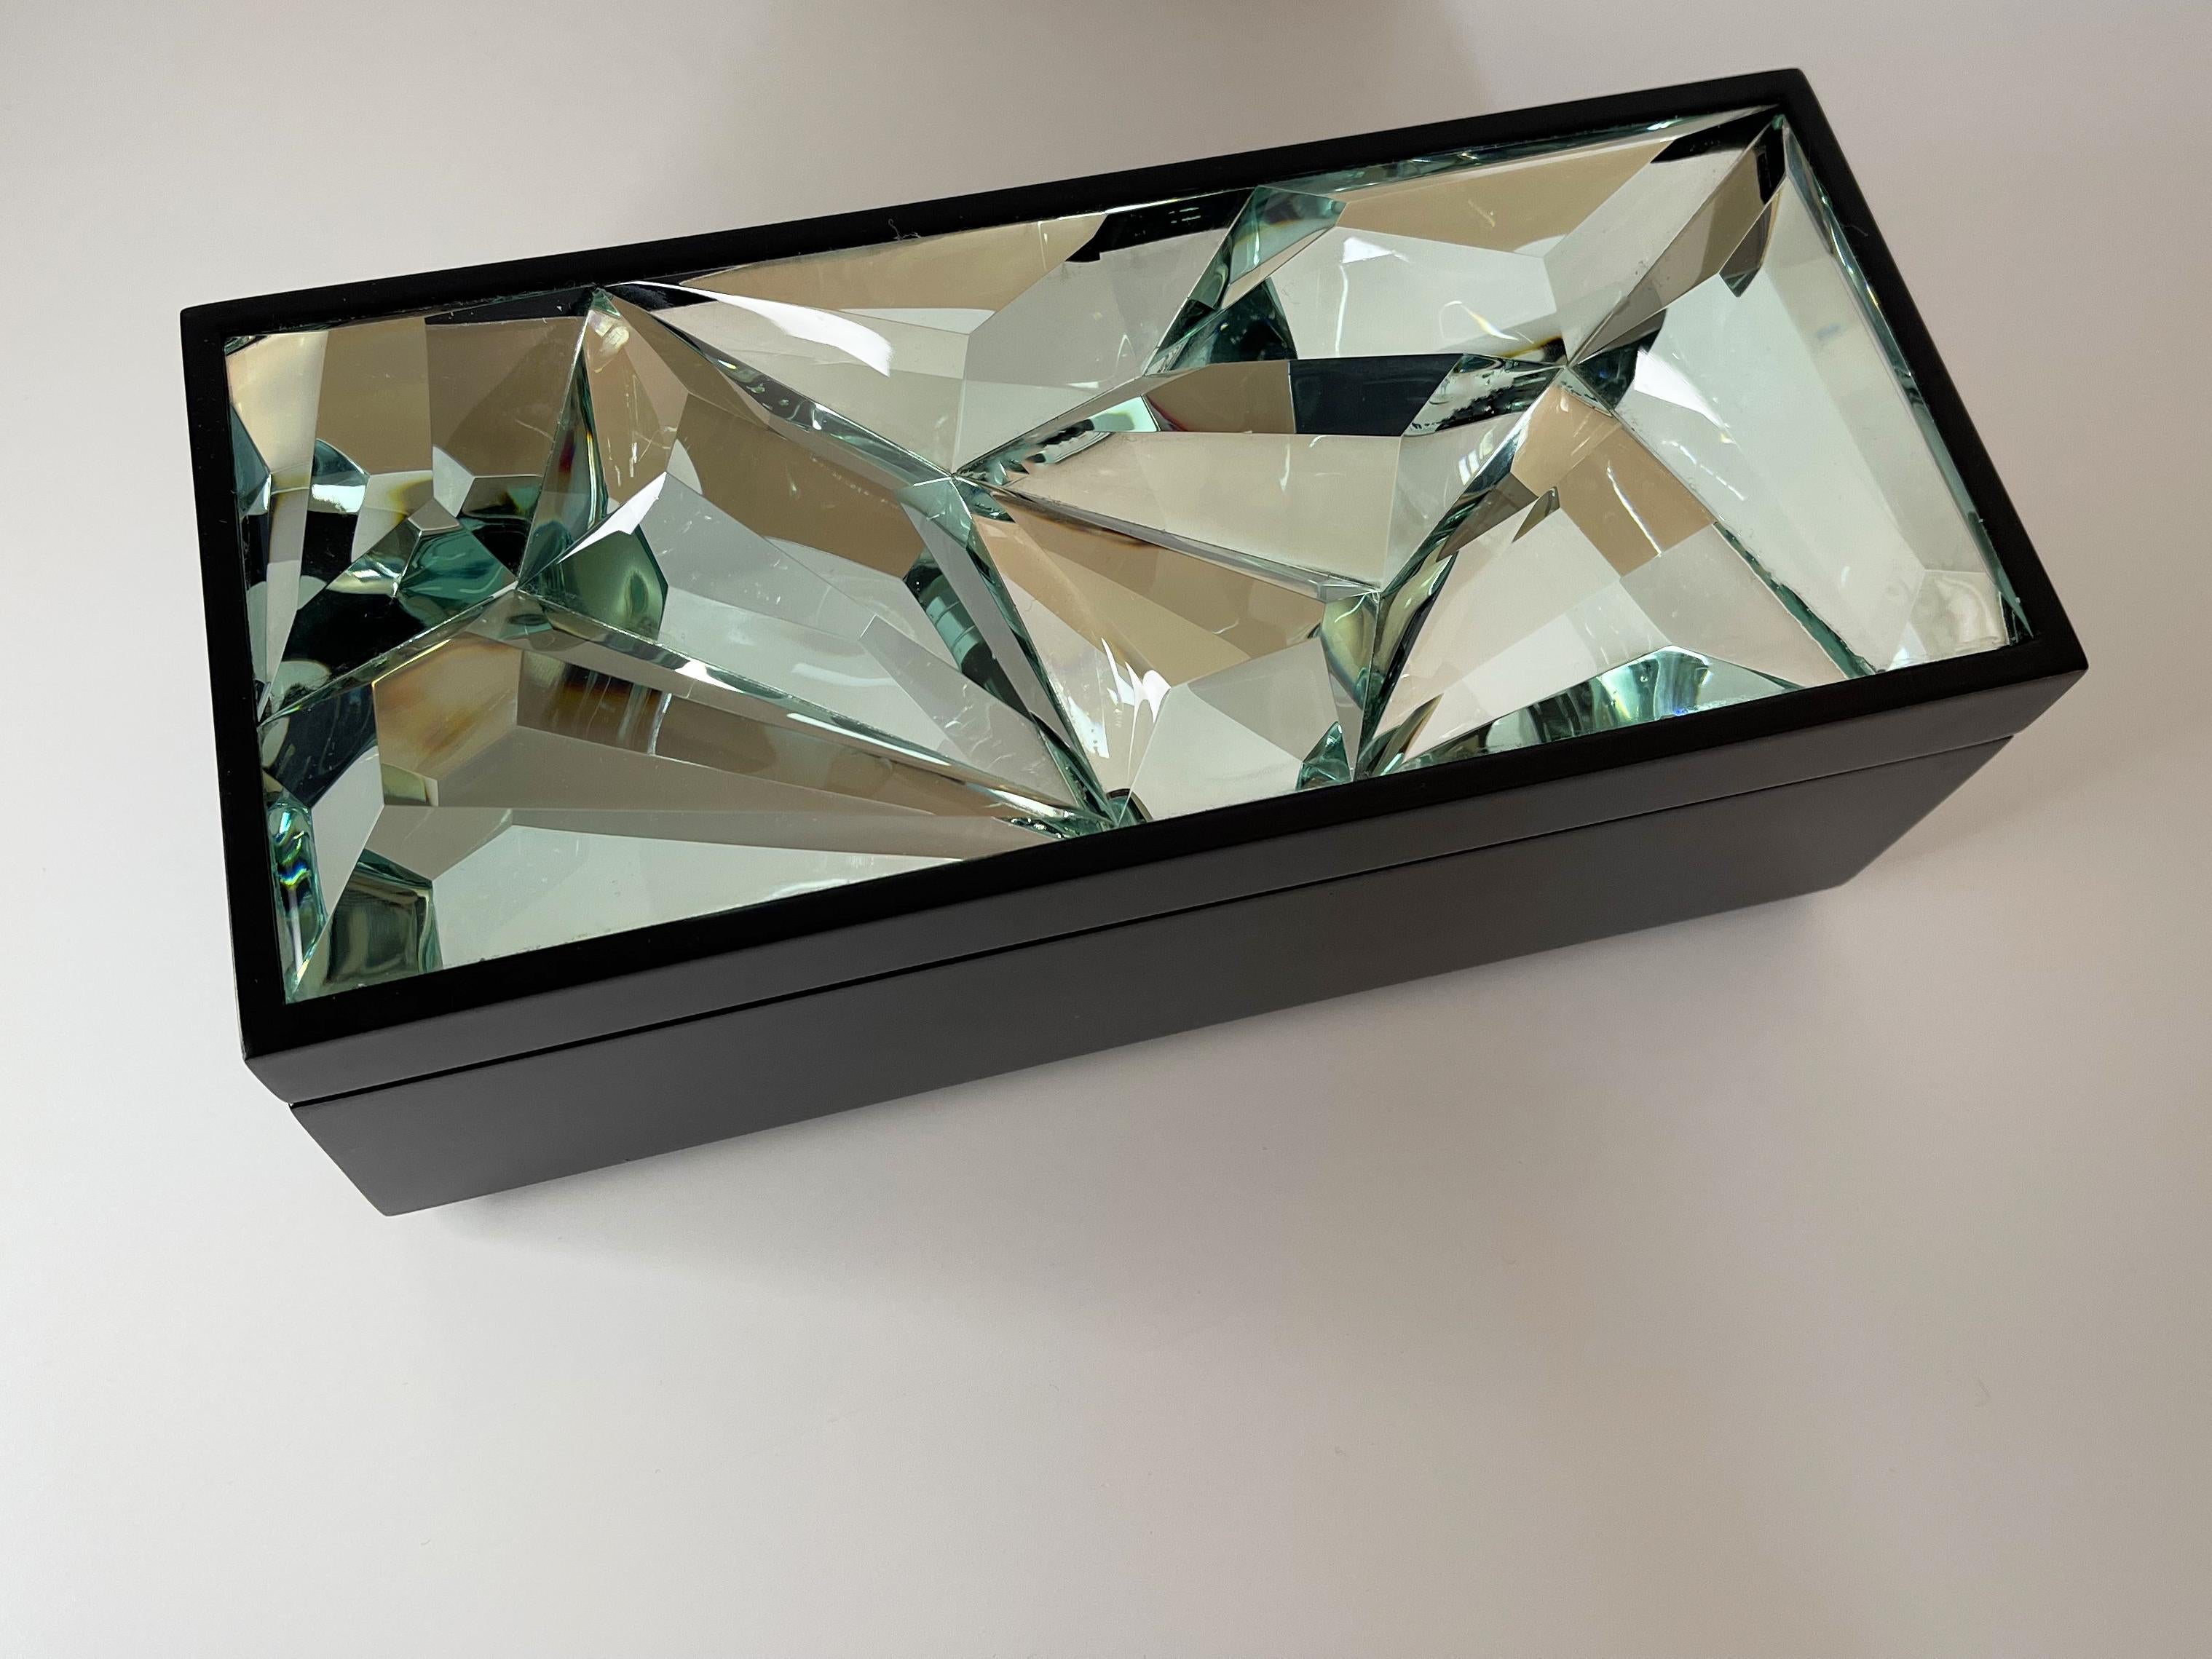 Italian Contemporary 'Pixel' Jewelry Box Handmade Black Wood and Glass by Ghirò Studio For Sale